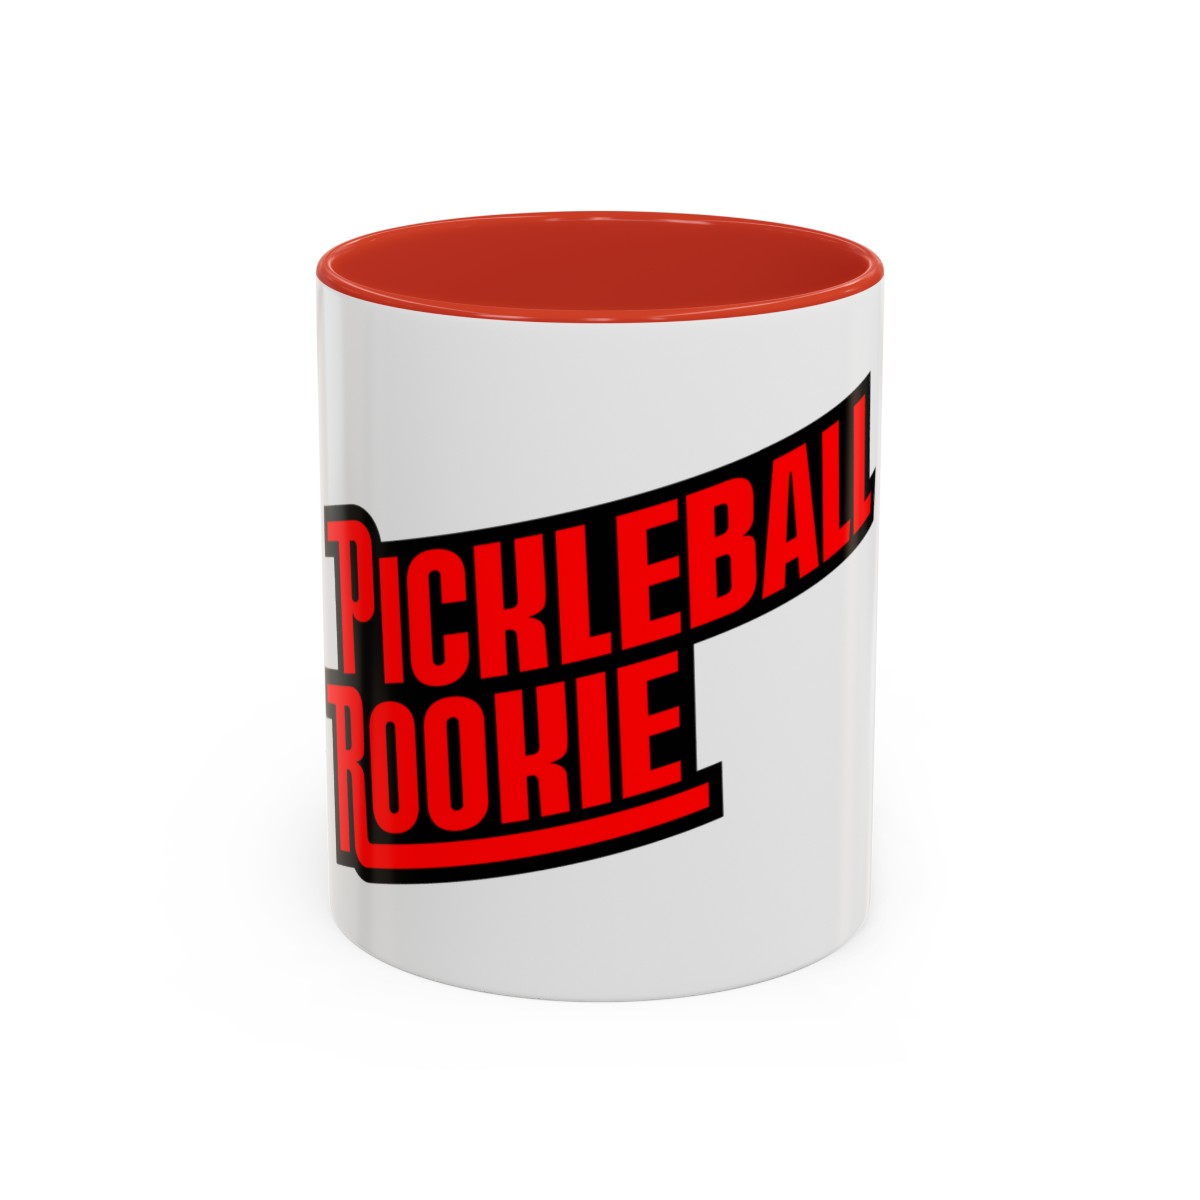 Pickleball Rookie - Hype Accent Coffee Mug, 11oz product main image